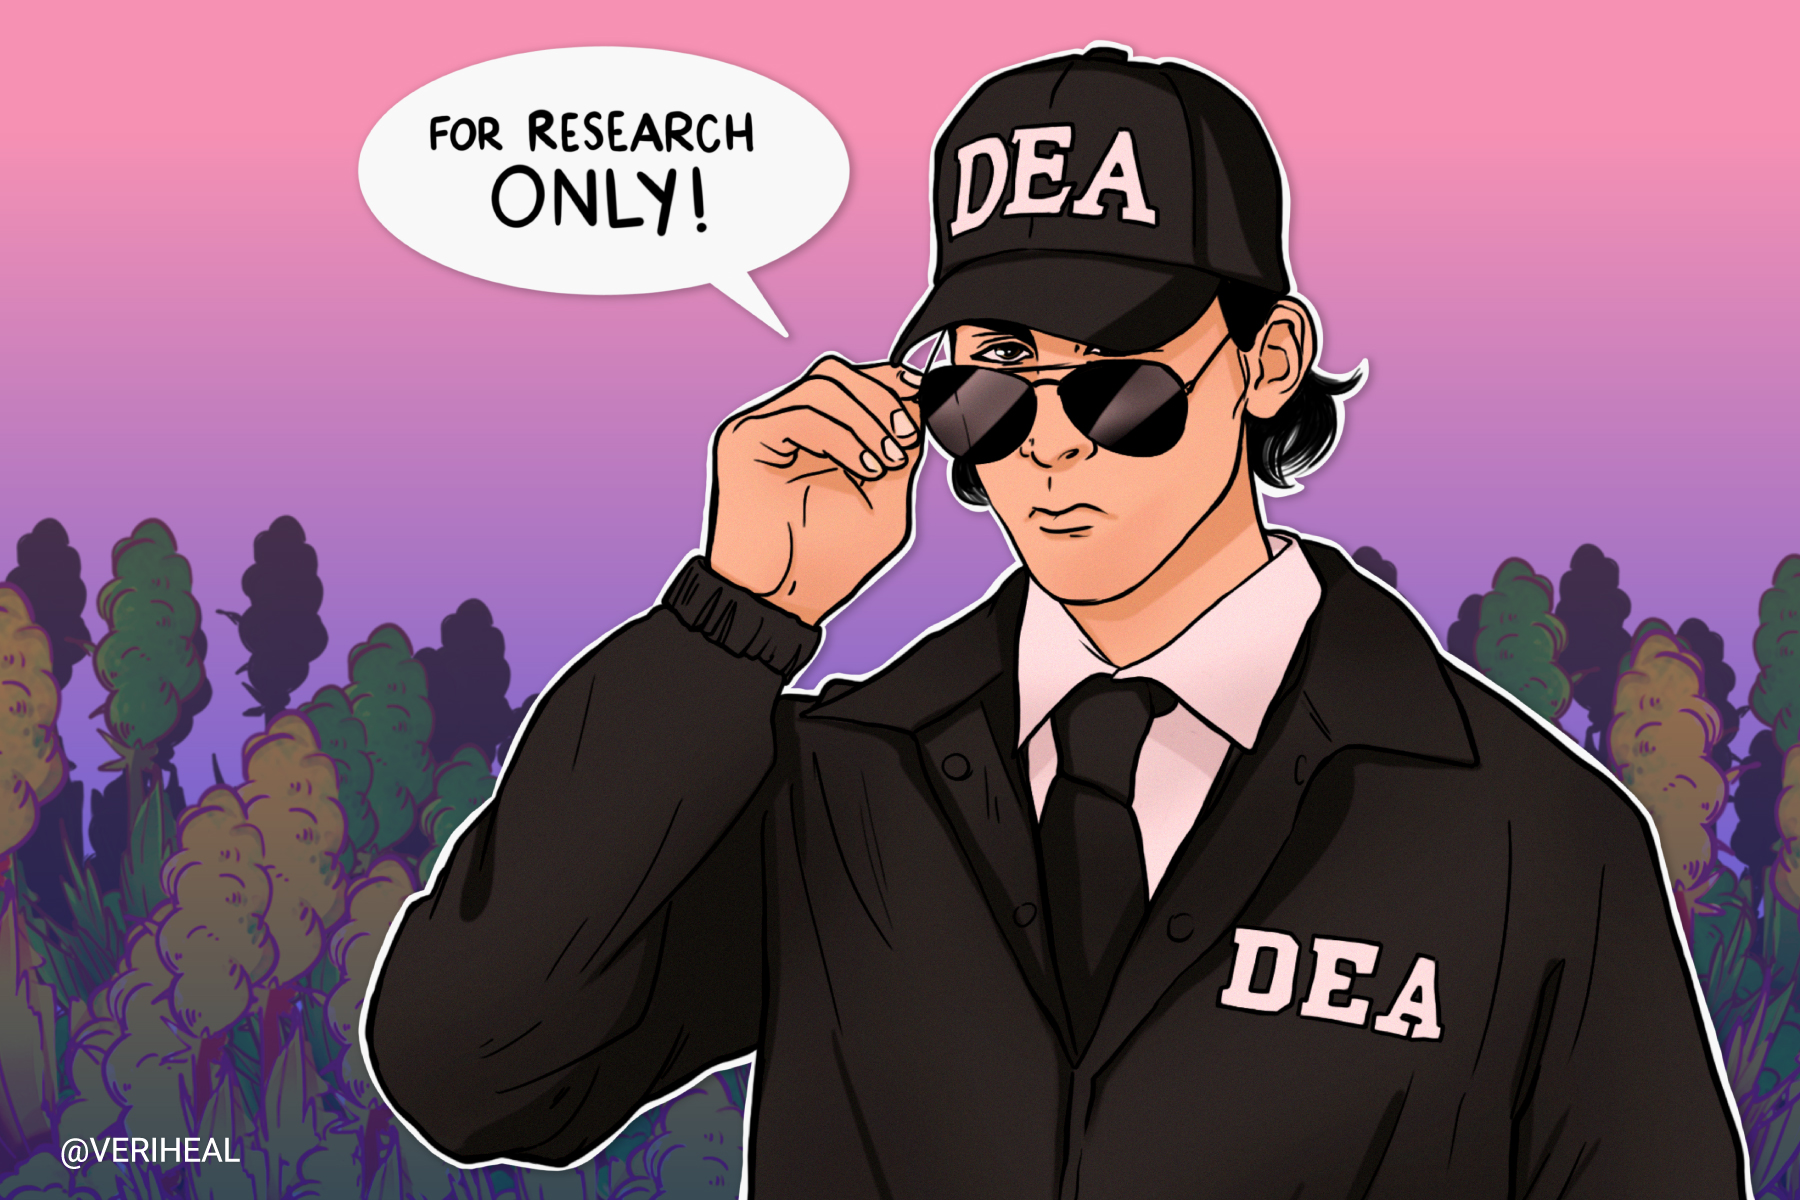 DEA Increases Access to Cannabis for Research Purposes